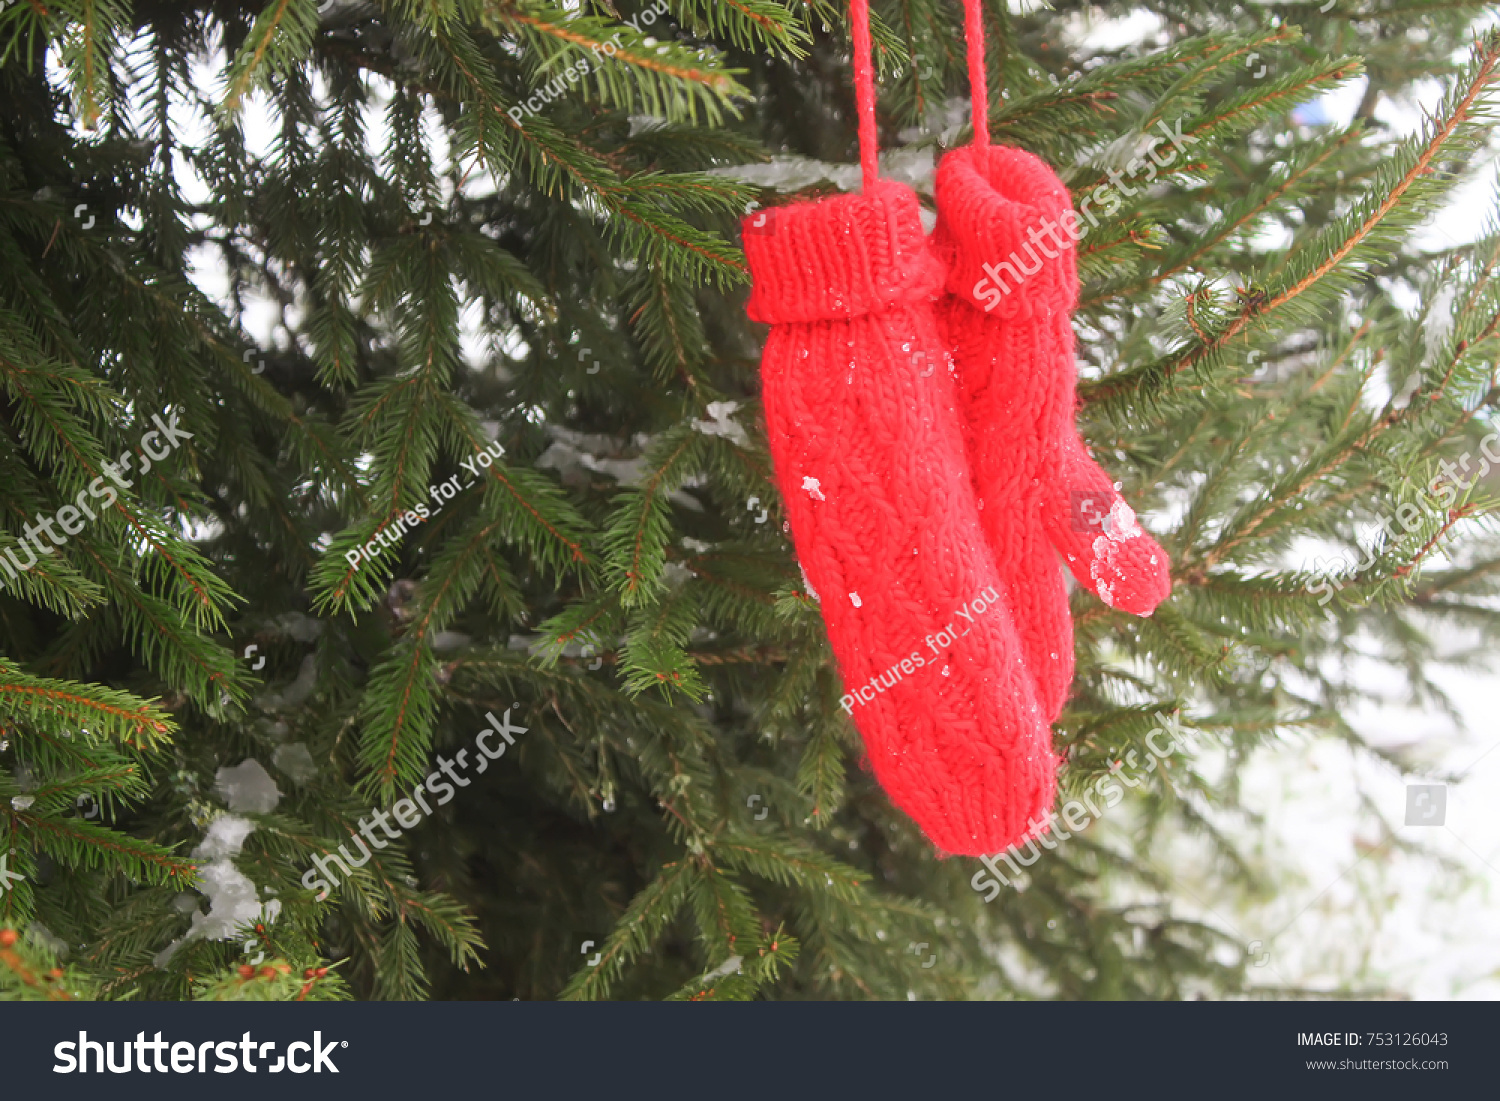 Red mittens hanging on fir tree green branches in winter park. #753126043